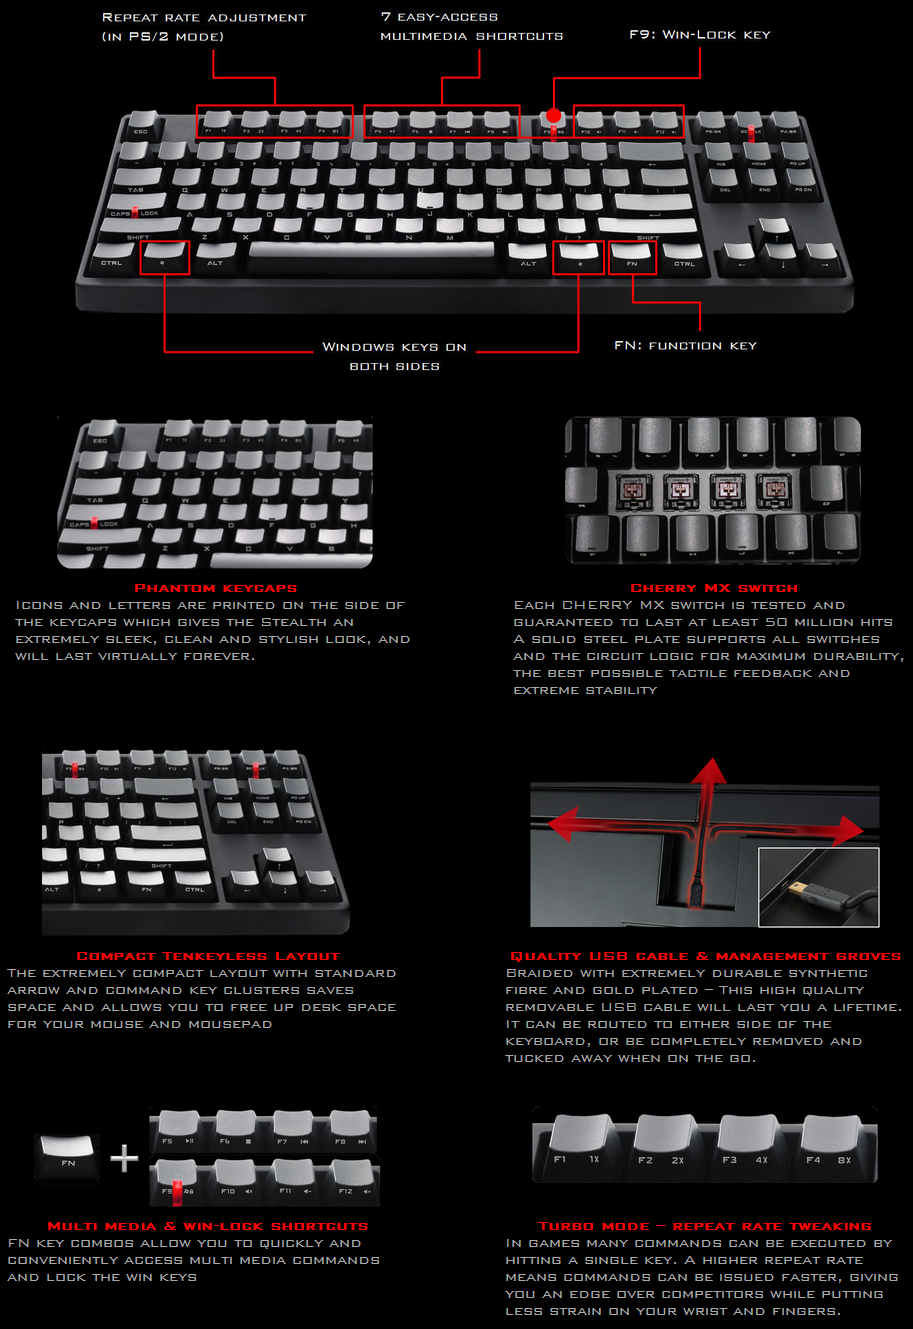 Cooler Master Storm Stealth Cherry MX Blue Mechanical Keyboard features